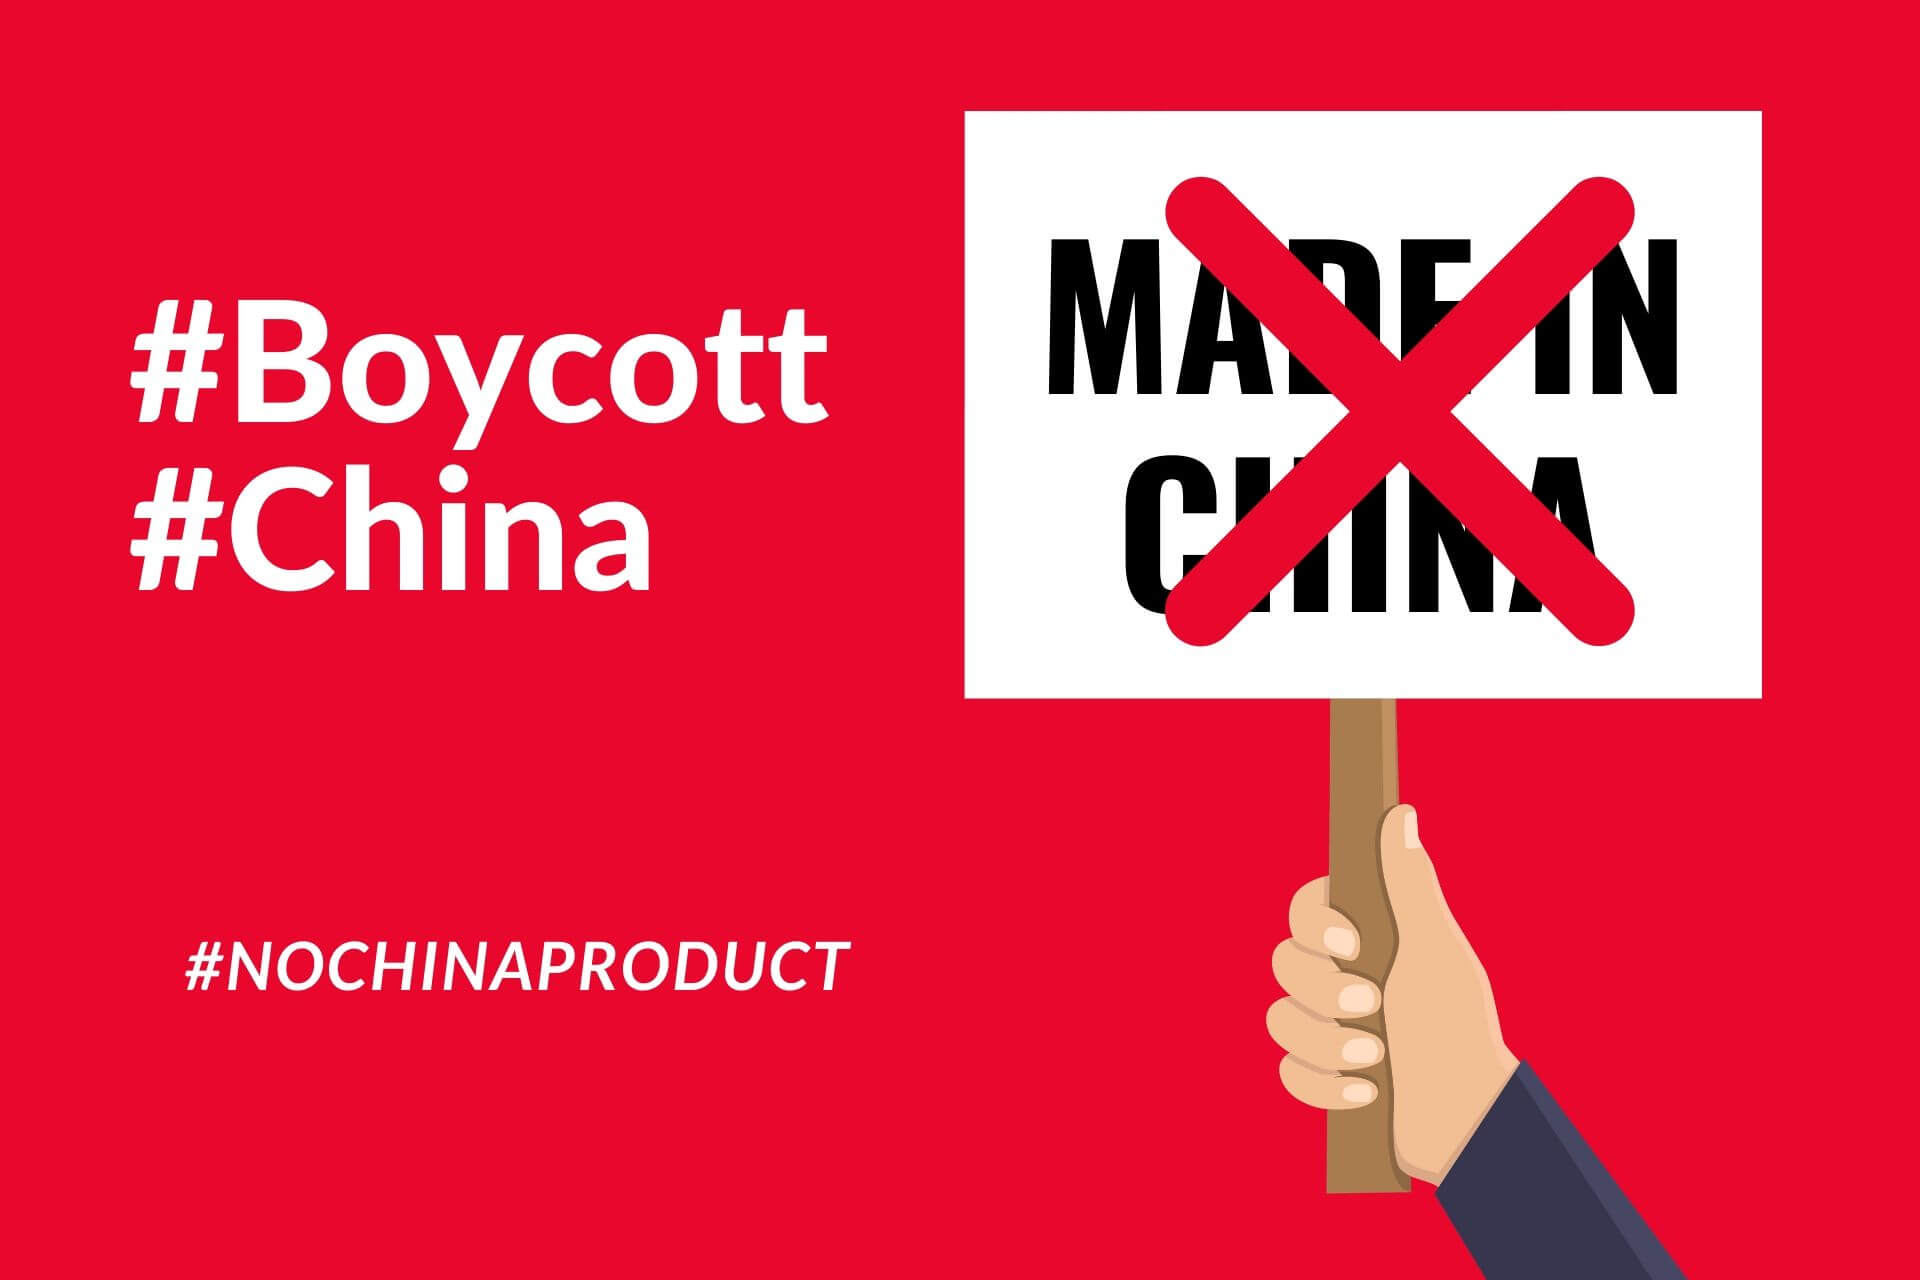 Best Collection of Boycott China Products Slogans Quotes Shayari Status Images Poster in Hindi for Whatsapp FB Insta Reels Twitter Reddit | चाइनीस प्रोडक्ट बॉयकॉट बैन पर कविता शायरी